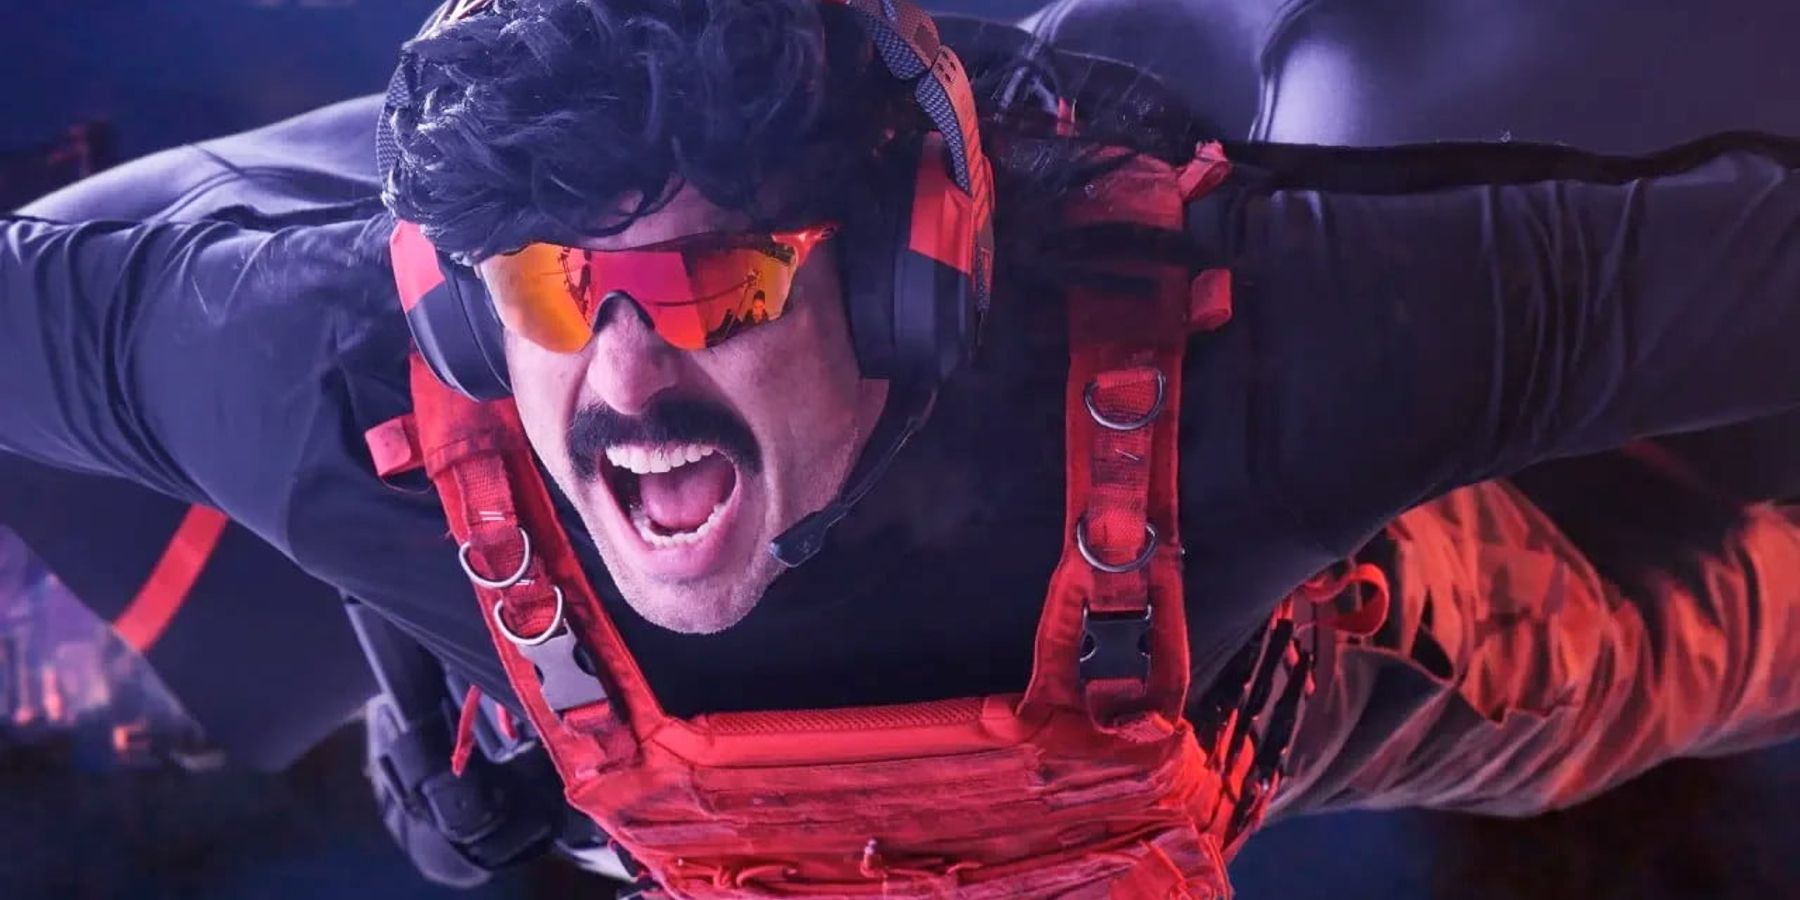 dr disrespect drop in from youtube